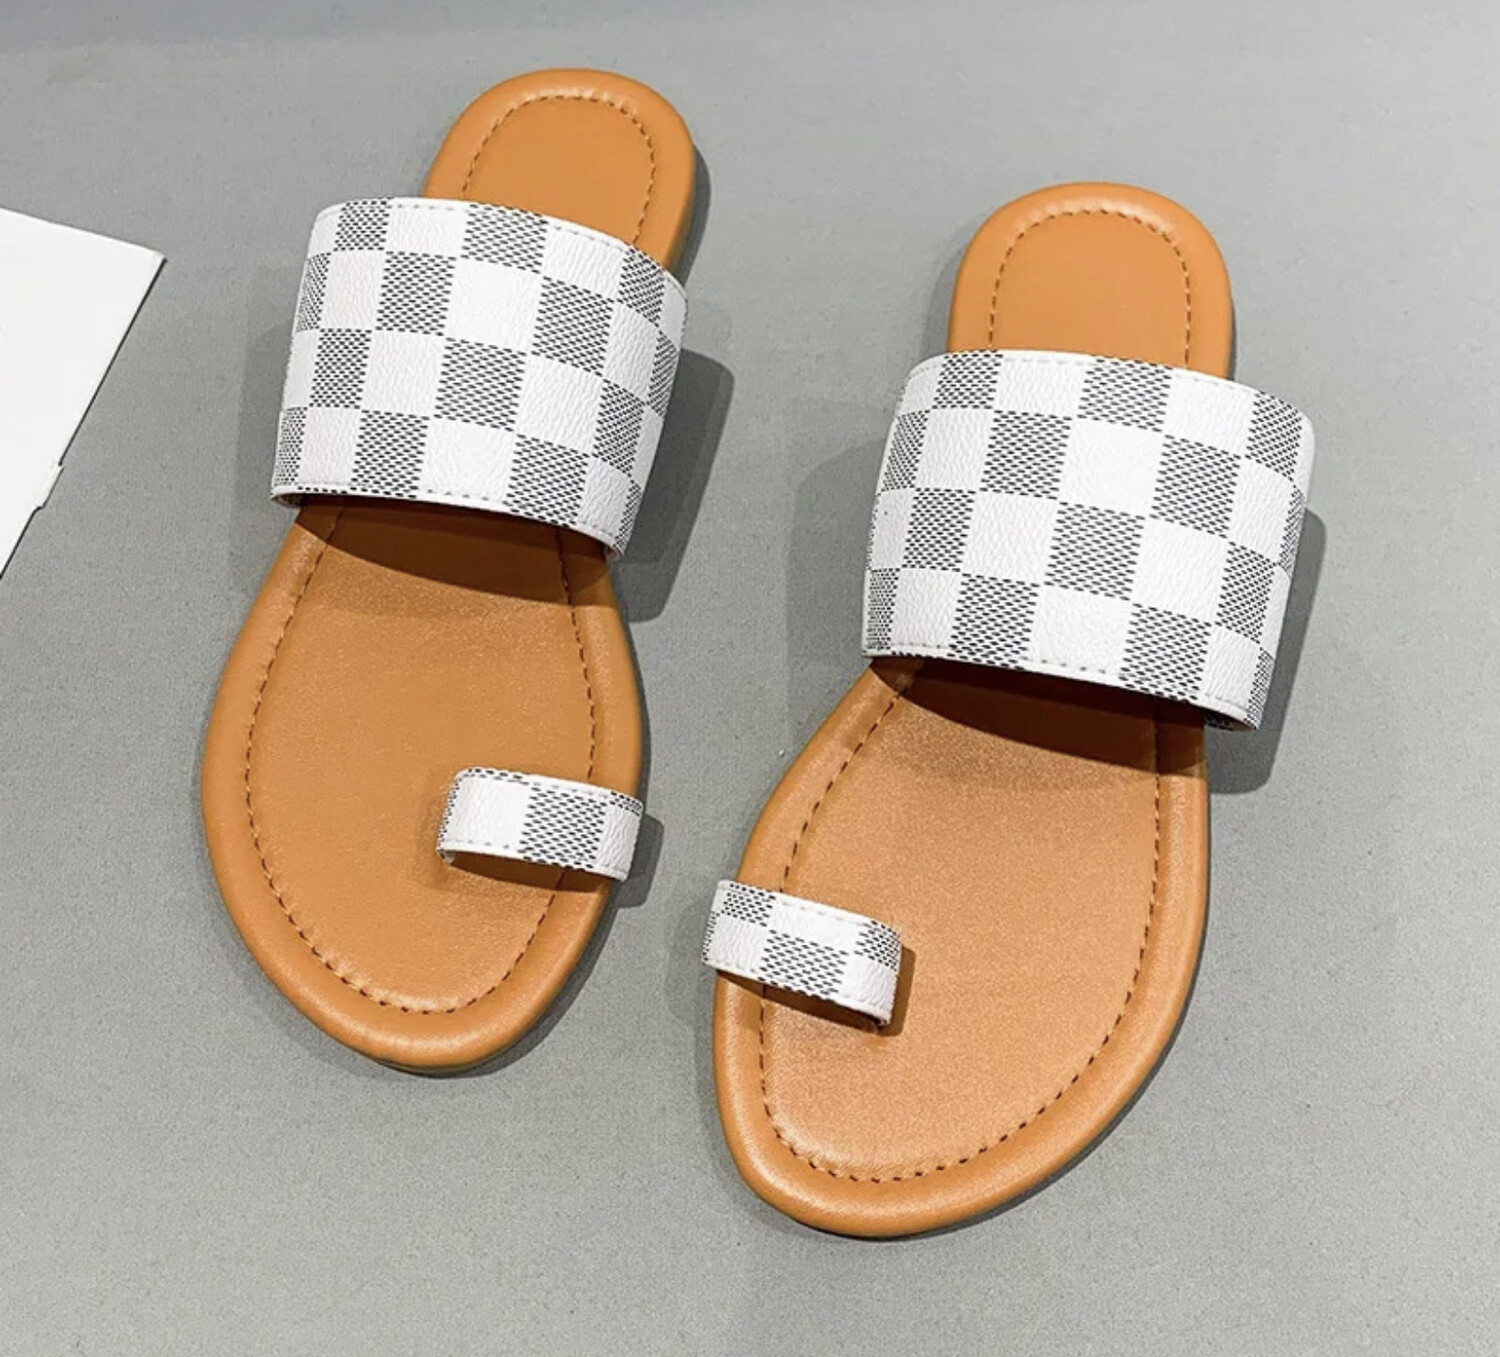 Chequered Sandal